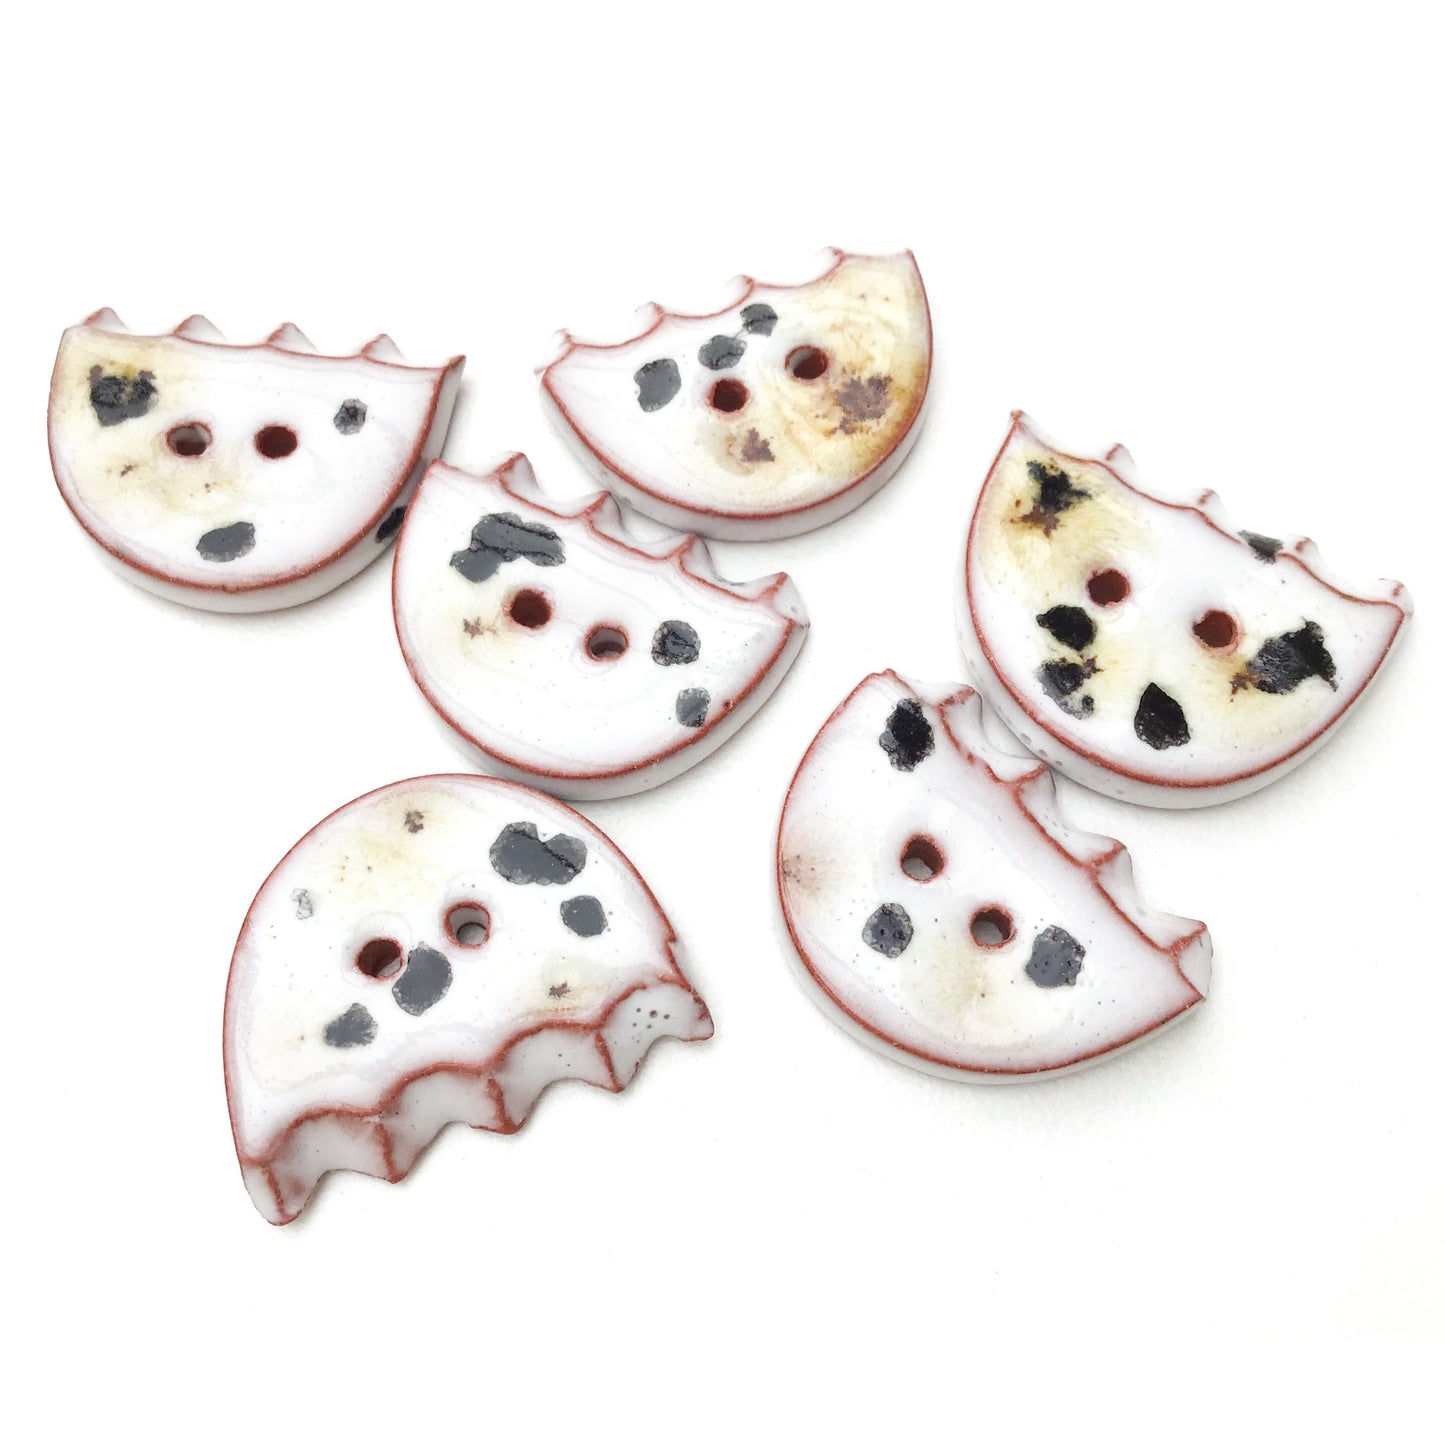 White + Black + Brown Ceramic Buttons - Ceramic Flower Shaped Buttons - 3/4" x 1" - 6 Pack